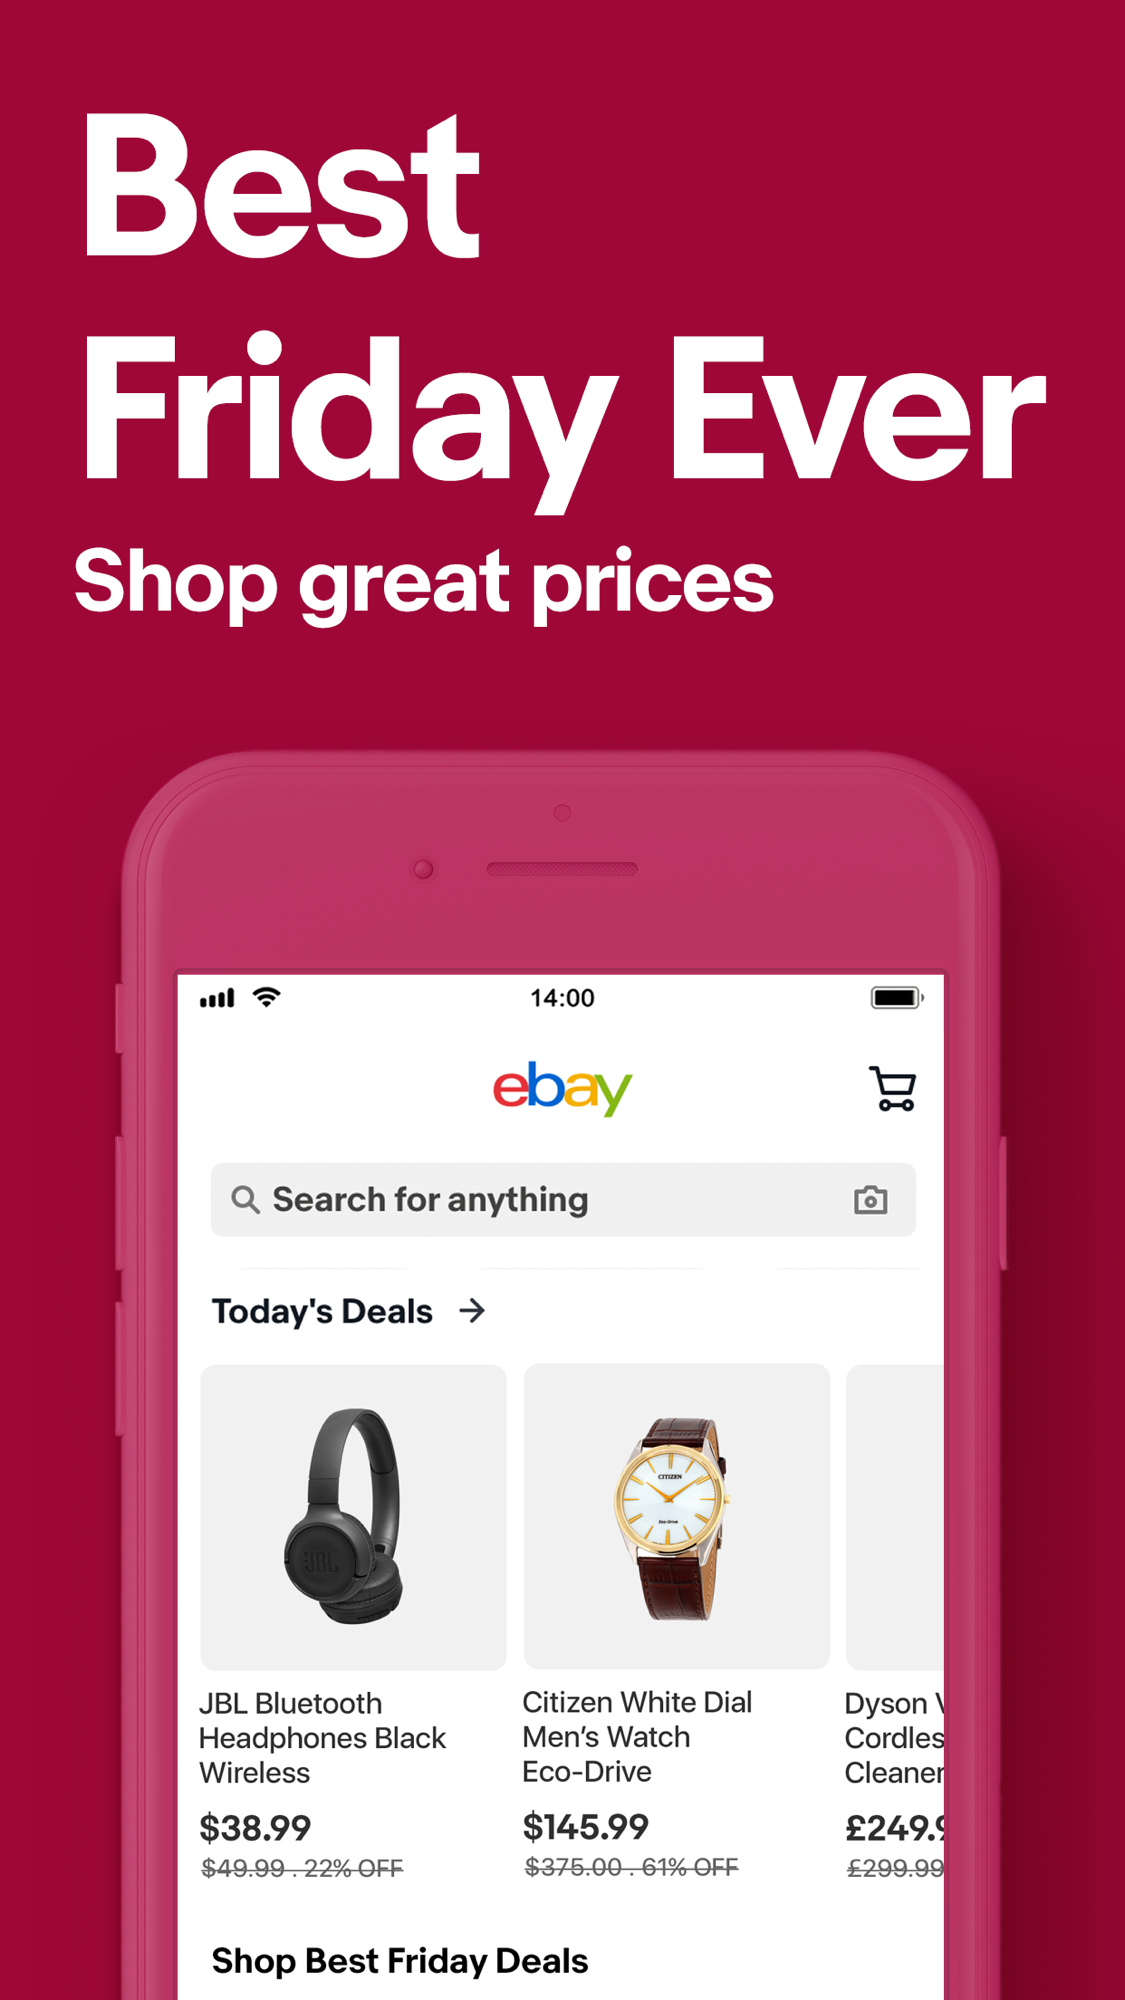 eBay Shopping: Buy, sell, save  Featured Image for Version 